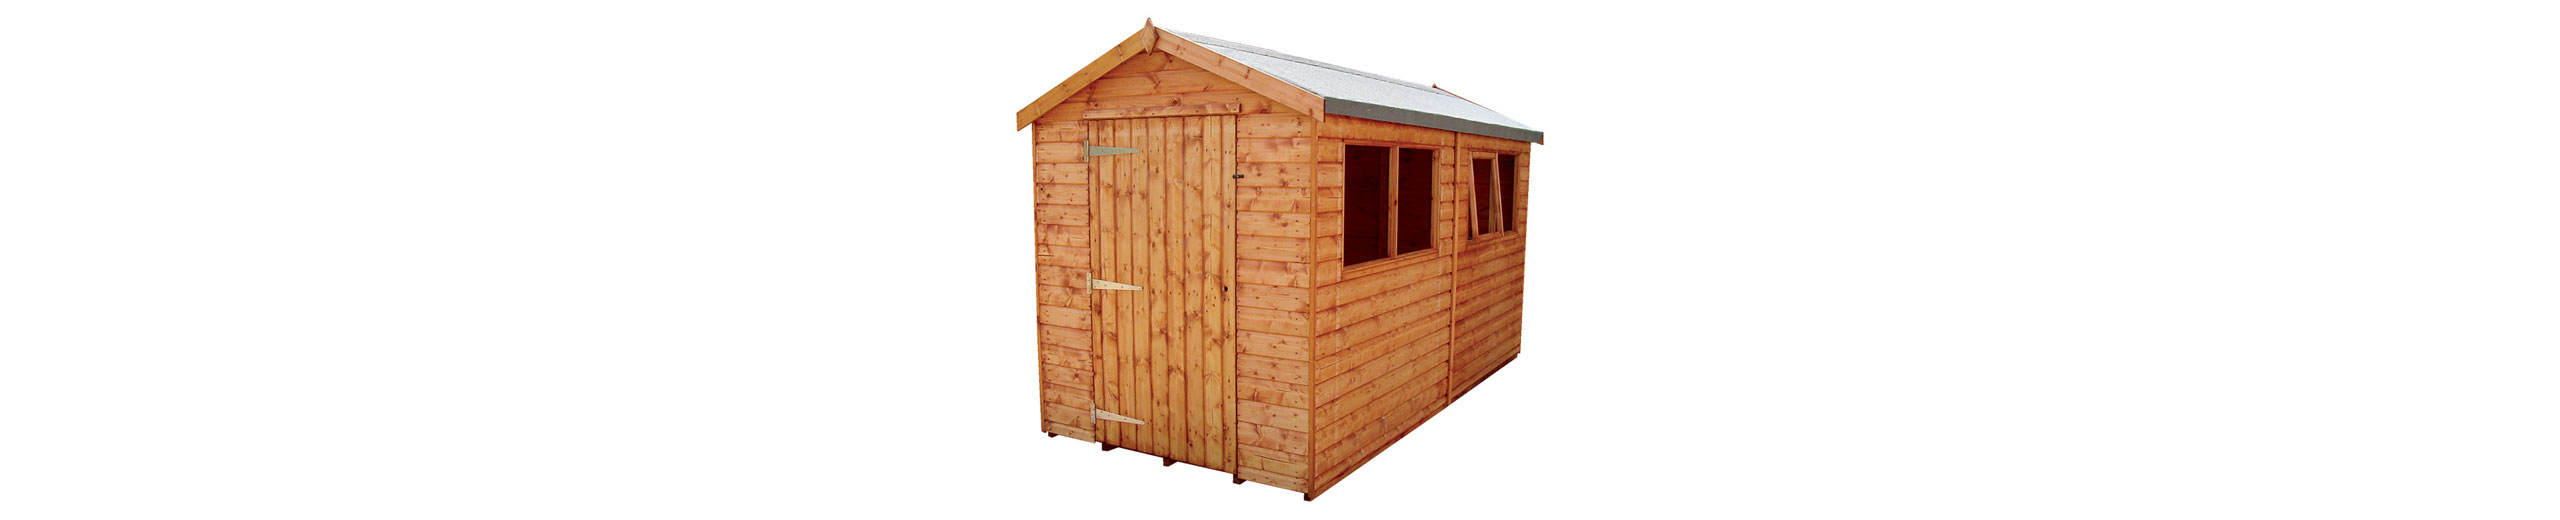 Small wooden garden shed